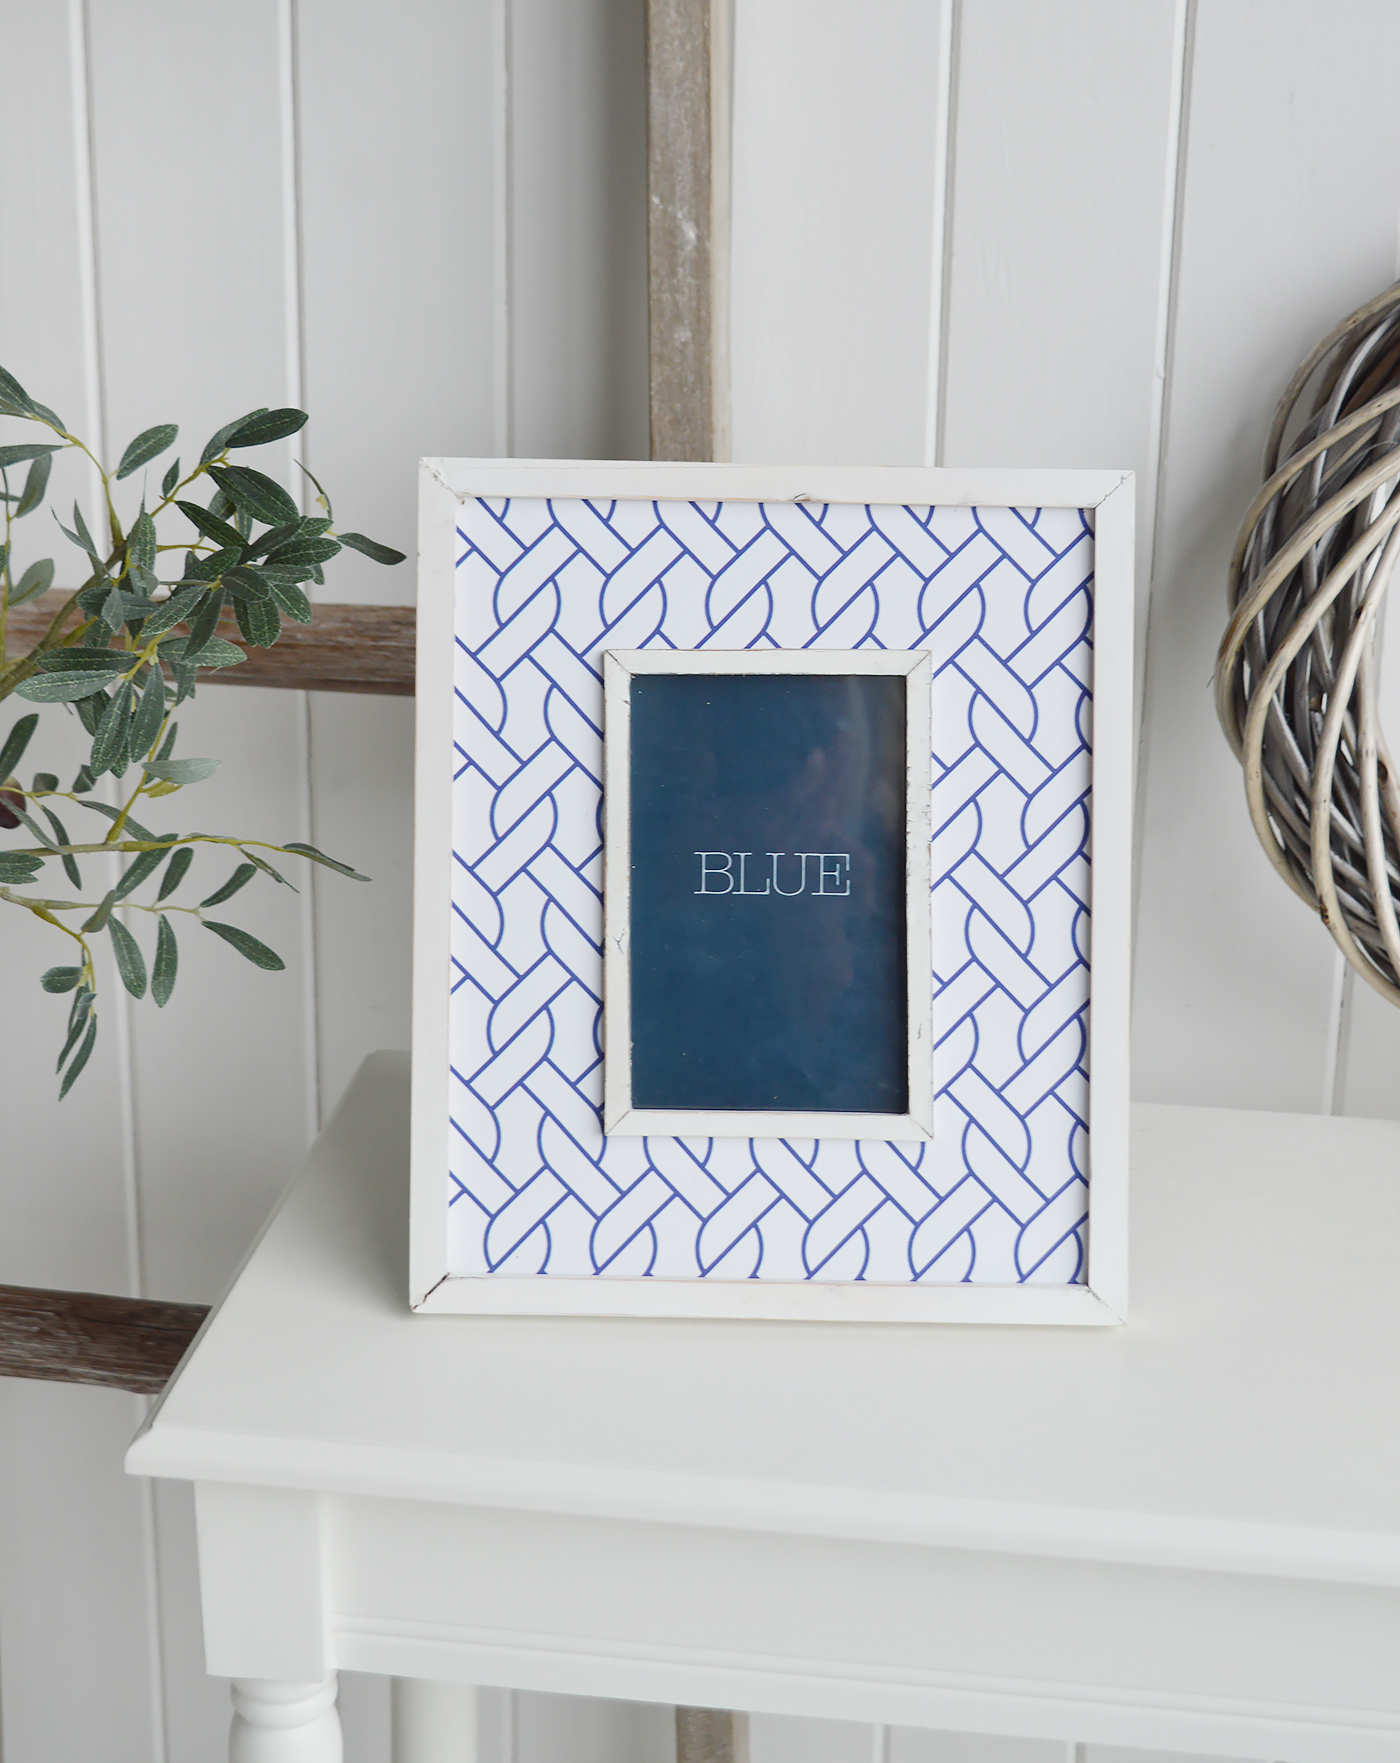 Clifton Photo Frames - New England Coastal, Farmhouse and Country Furniture and Interiors